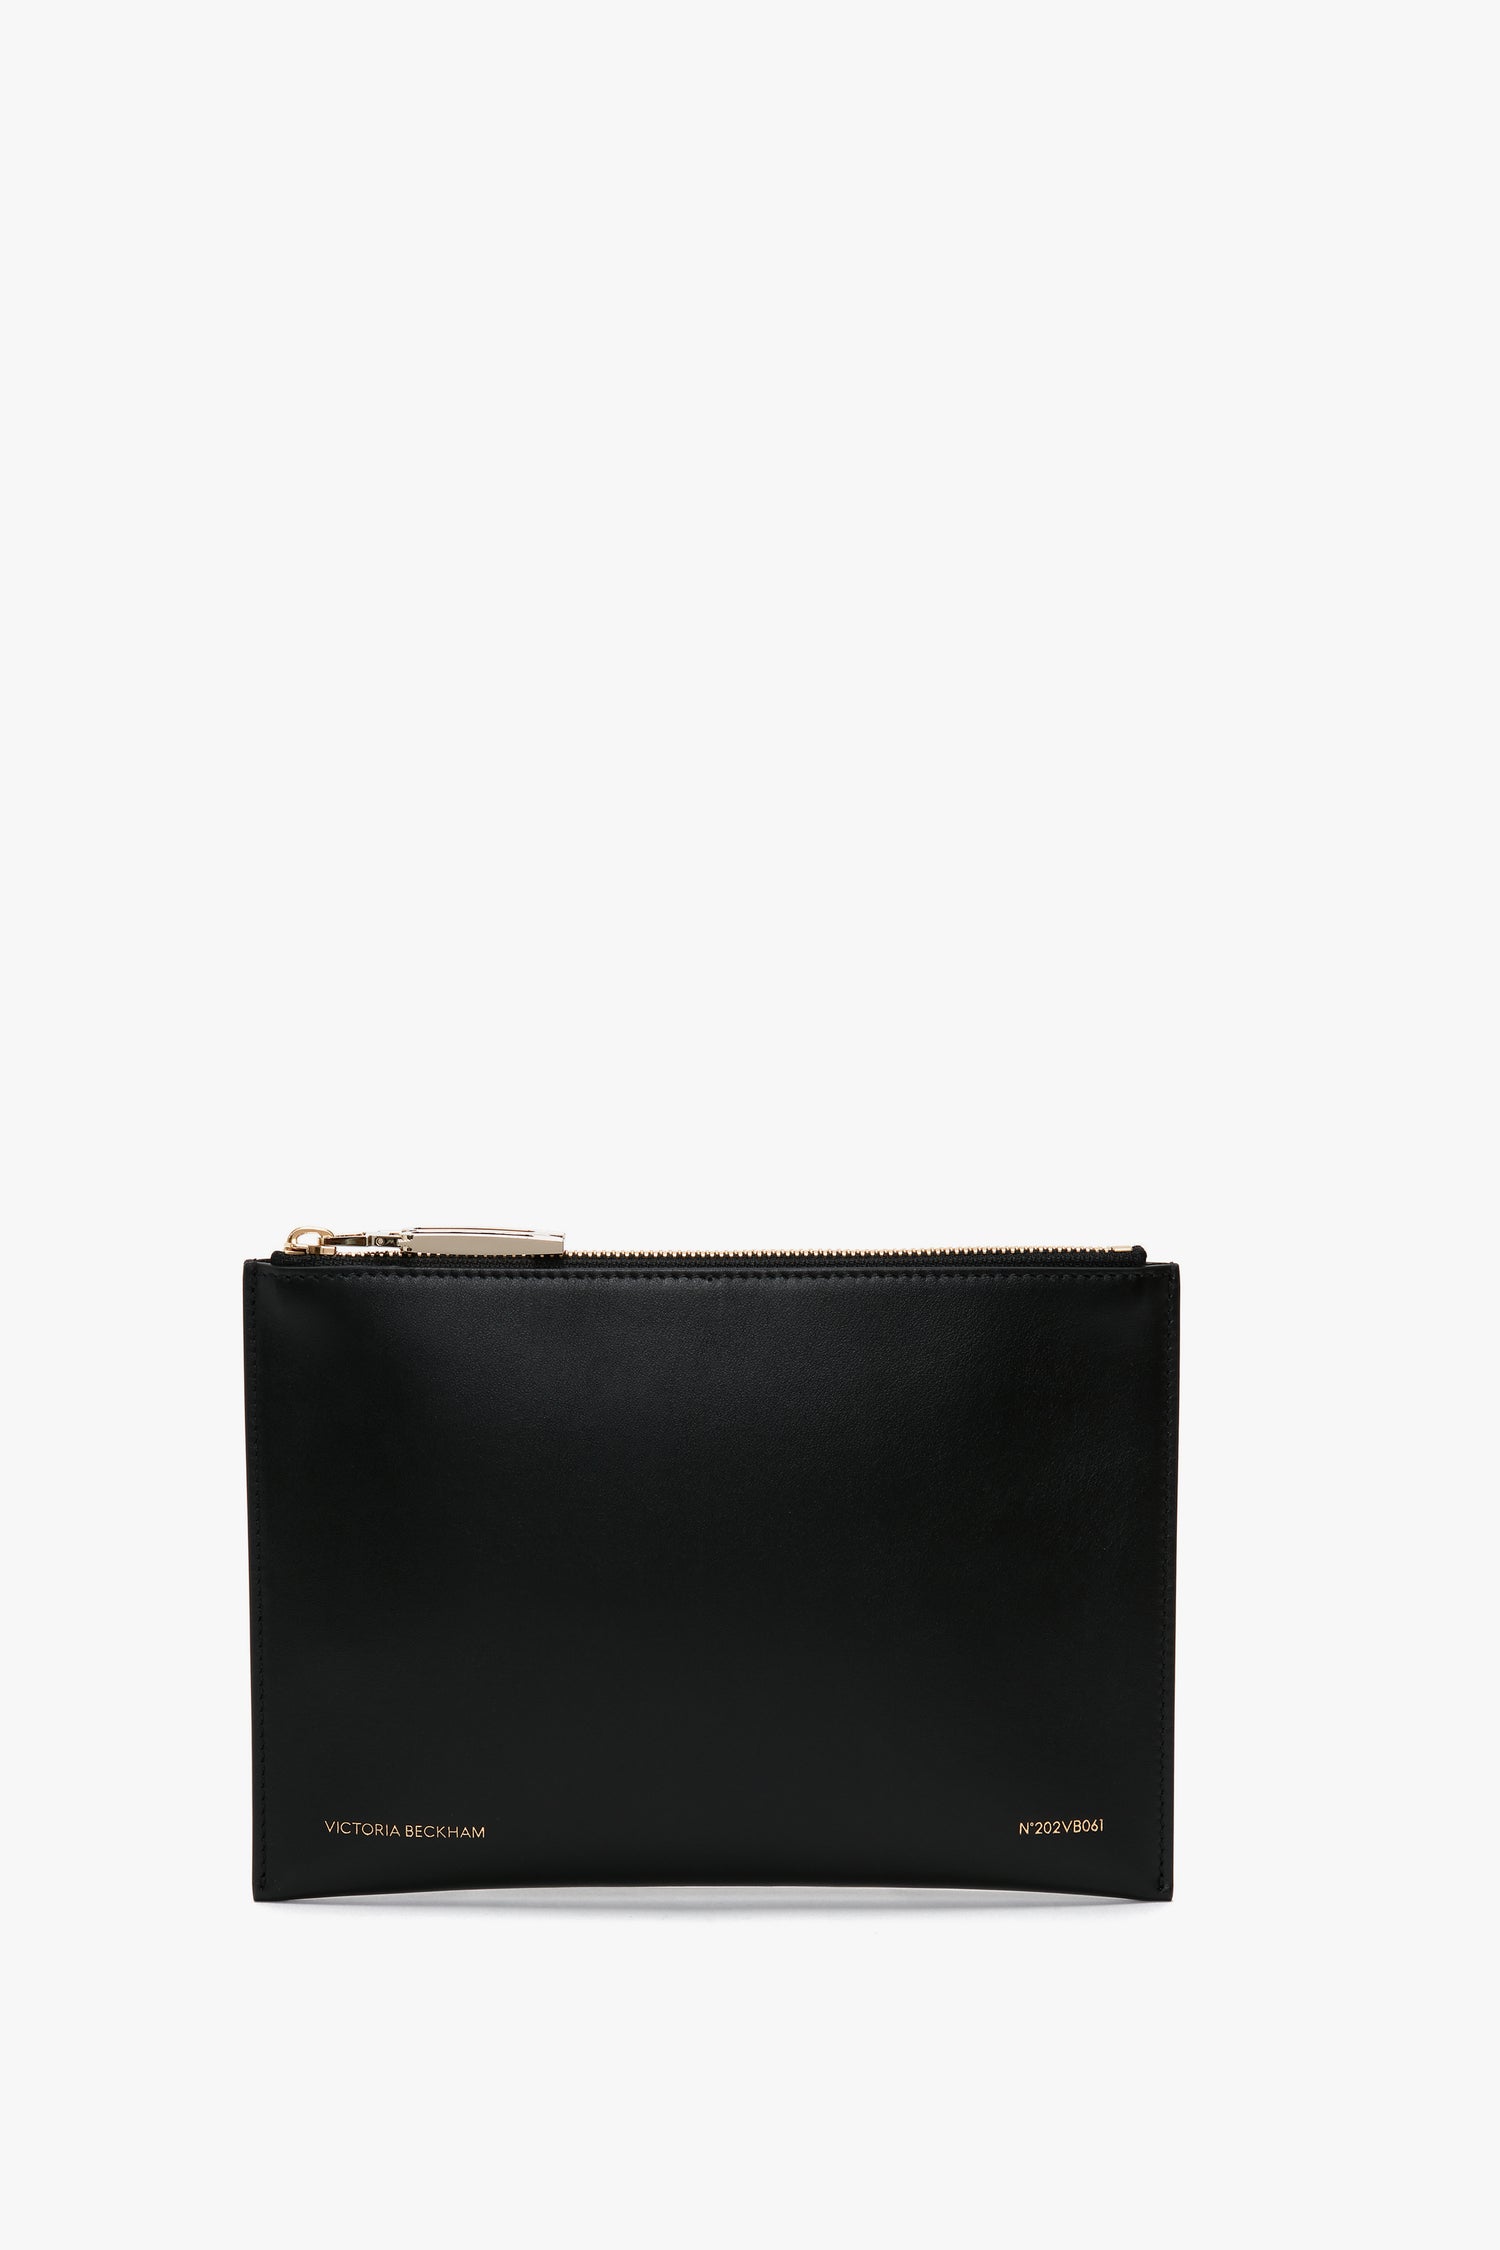 Black calf leather Victoria Beckham B Frame Pochette with a gold-tone zip closure, displayed against a white background.